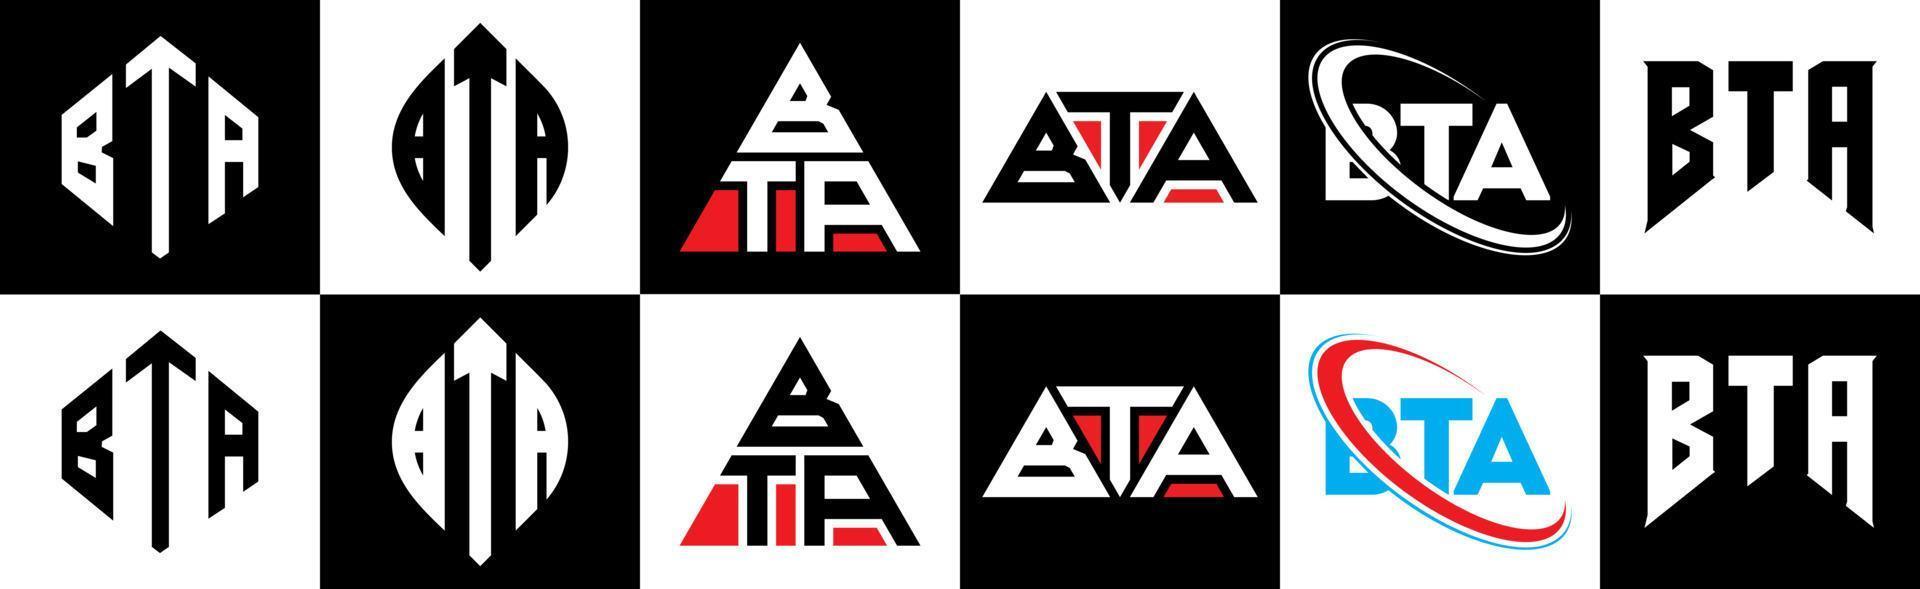 BTA letter logo design in six style. BTA polygon, circle, triangle, hexagon, flat and simple style with black and white color variation letter logo set in one artboard. BTA minimalist and classic logo vector